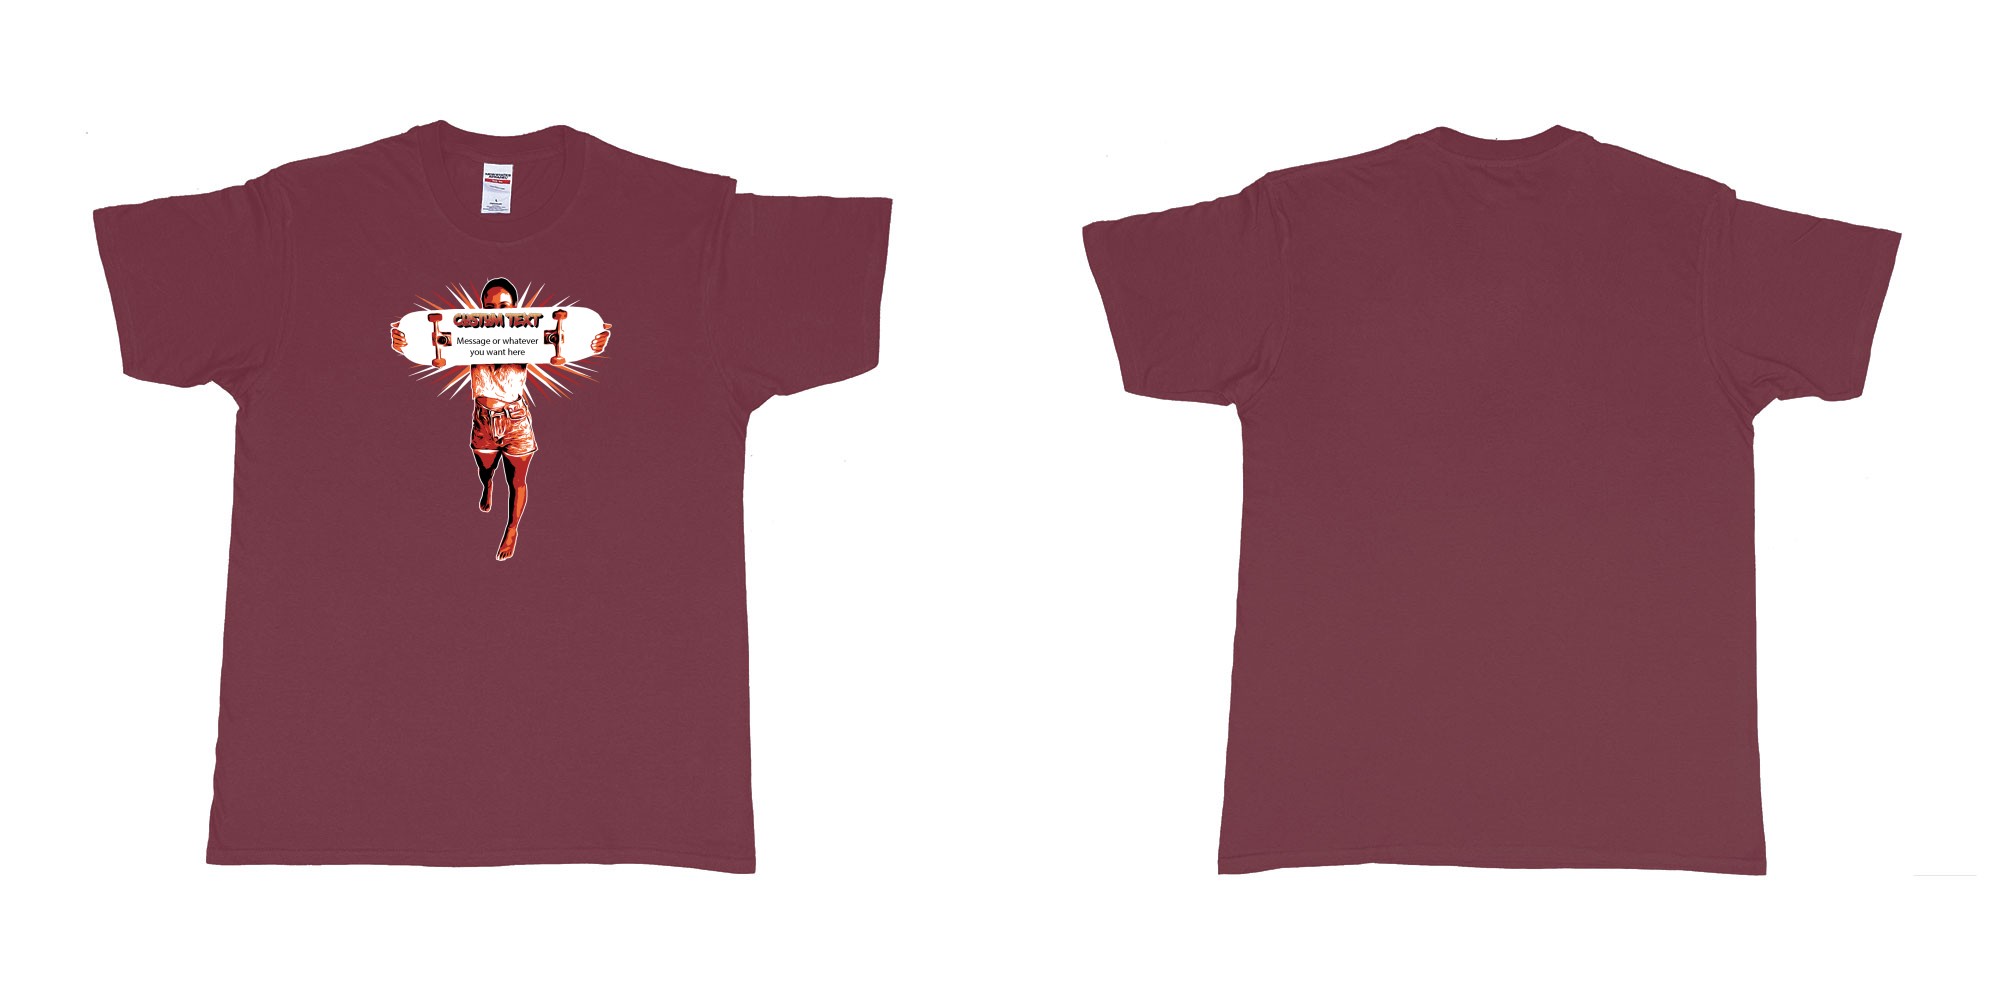 Custom tshirt design girl holding skateboard custom text own message in fabric color marron choice your own text made in Bali by The Pirate Way